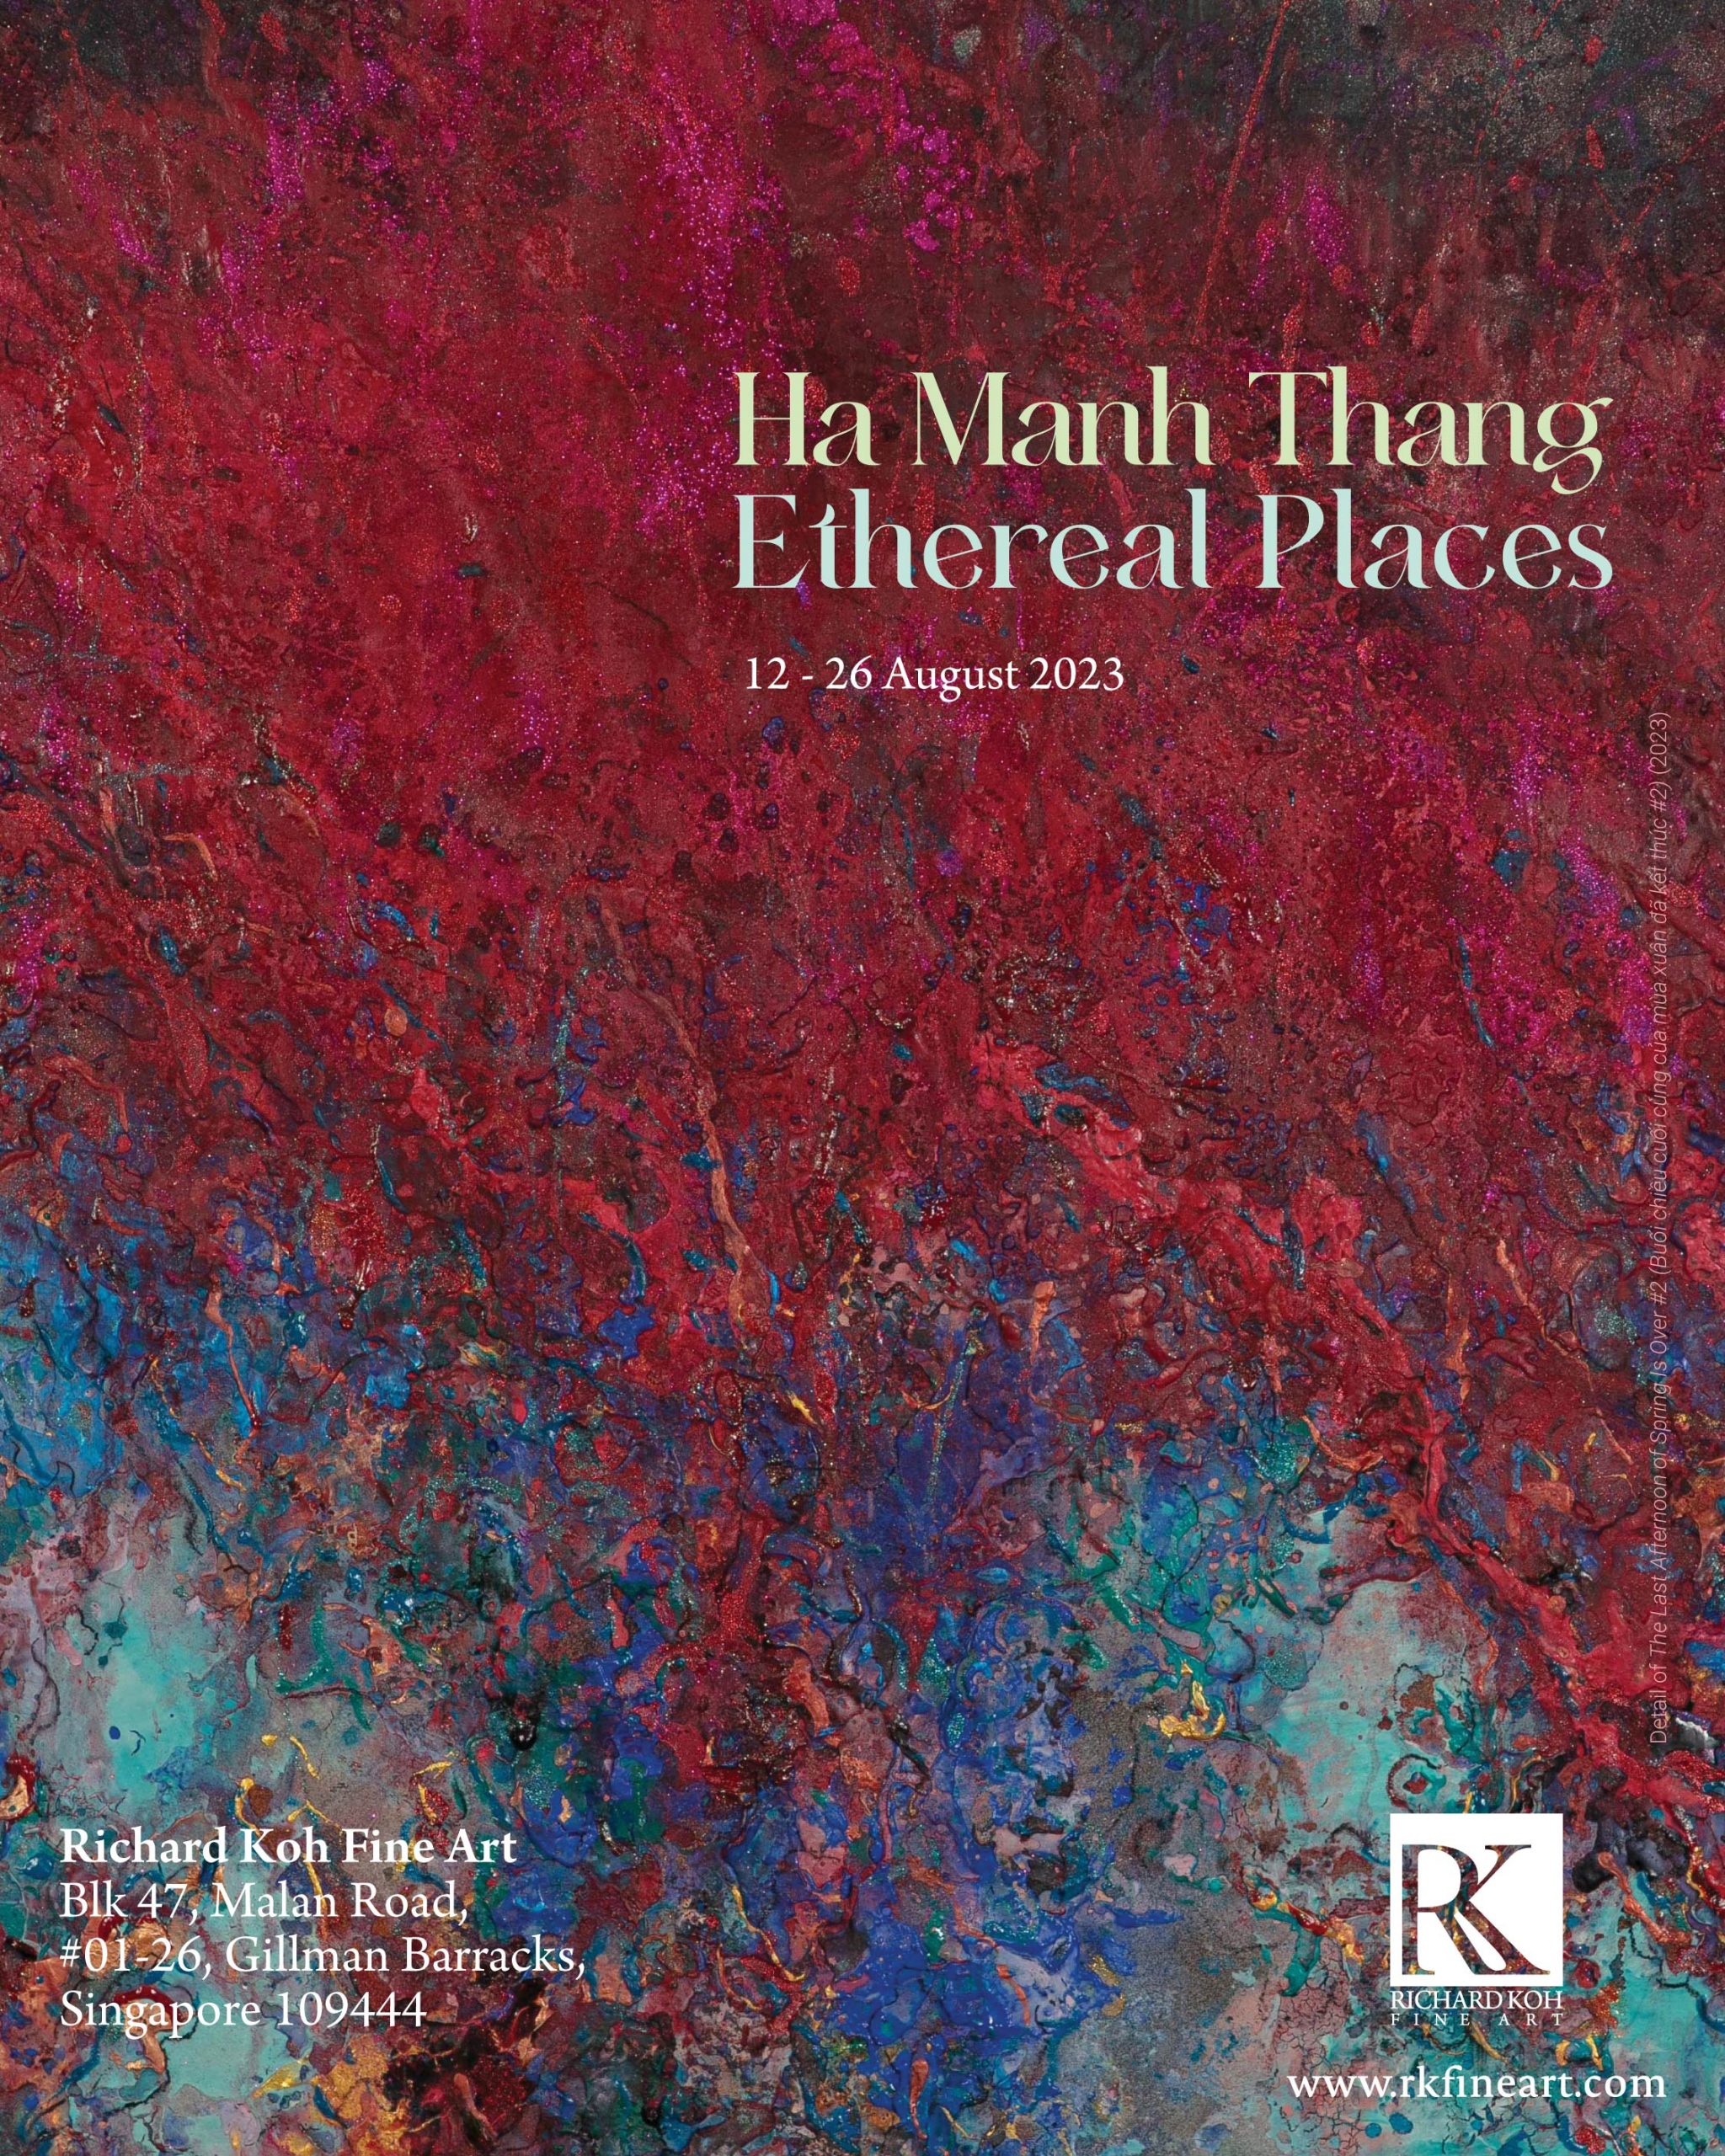   Ha Manh Thang – Ethereal Places